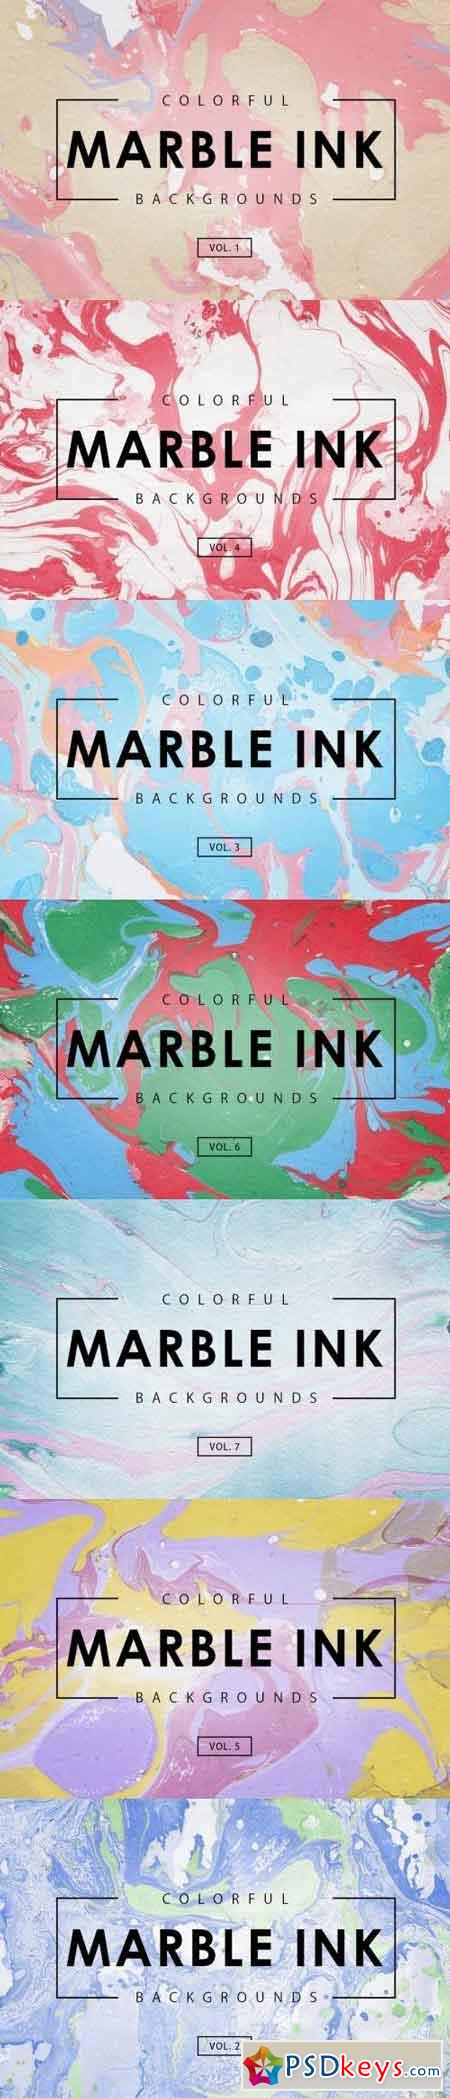 Colorful Marble Ink Backgrounds